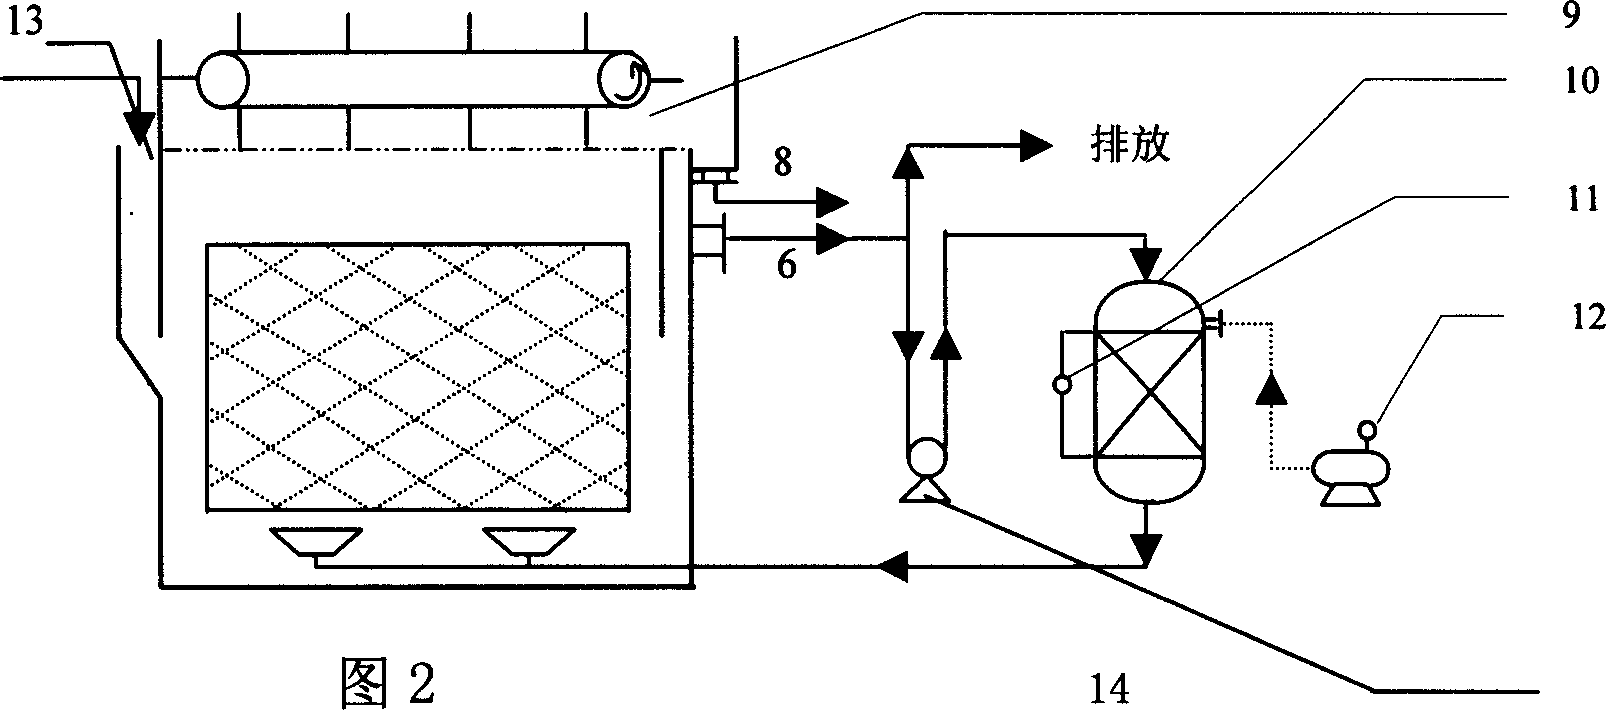 Treatment method of spent water from cleaning machinery parts